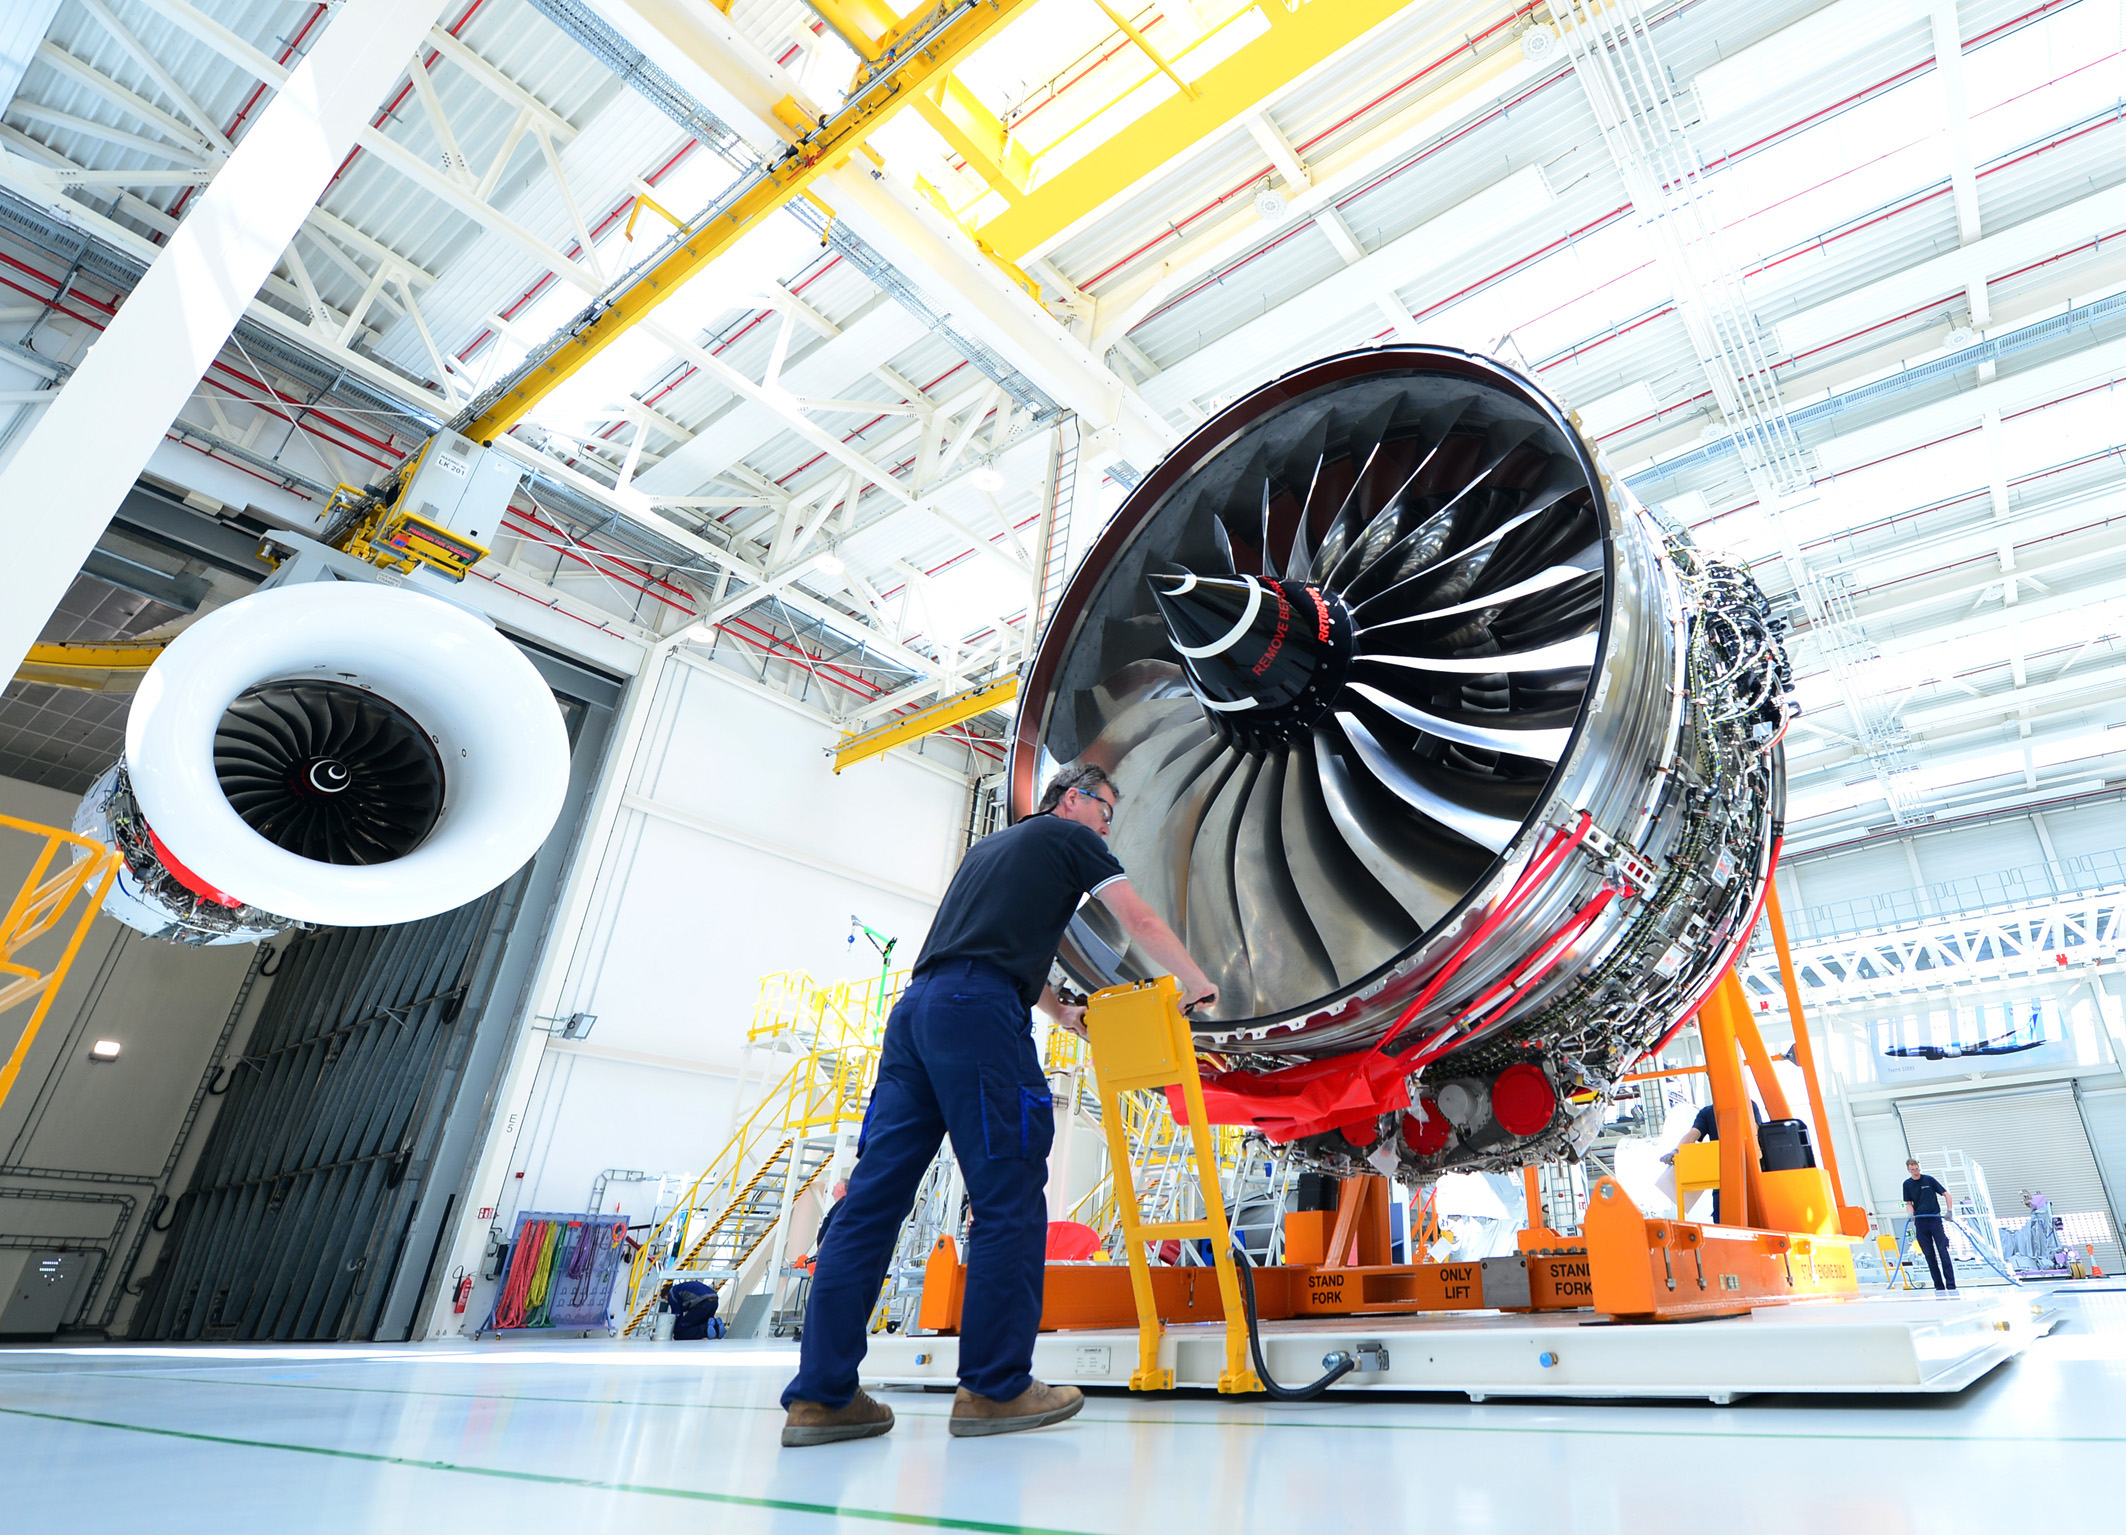 The first Rolls-Royce Trent XWB engine to be assembled in Dahlewitz, Germany